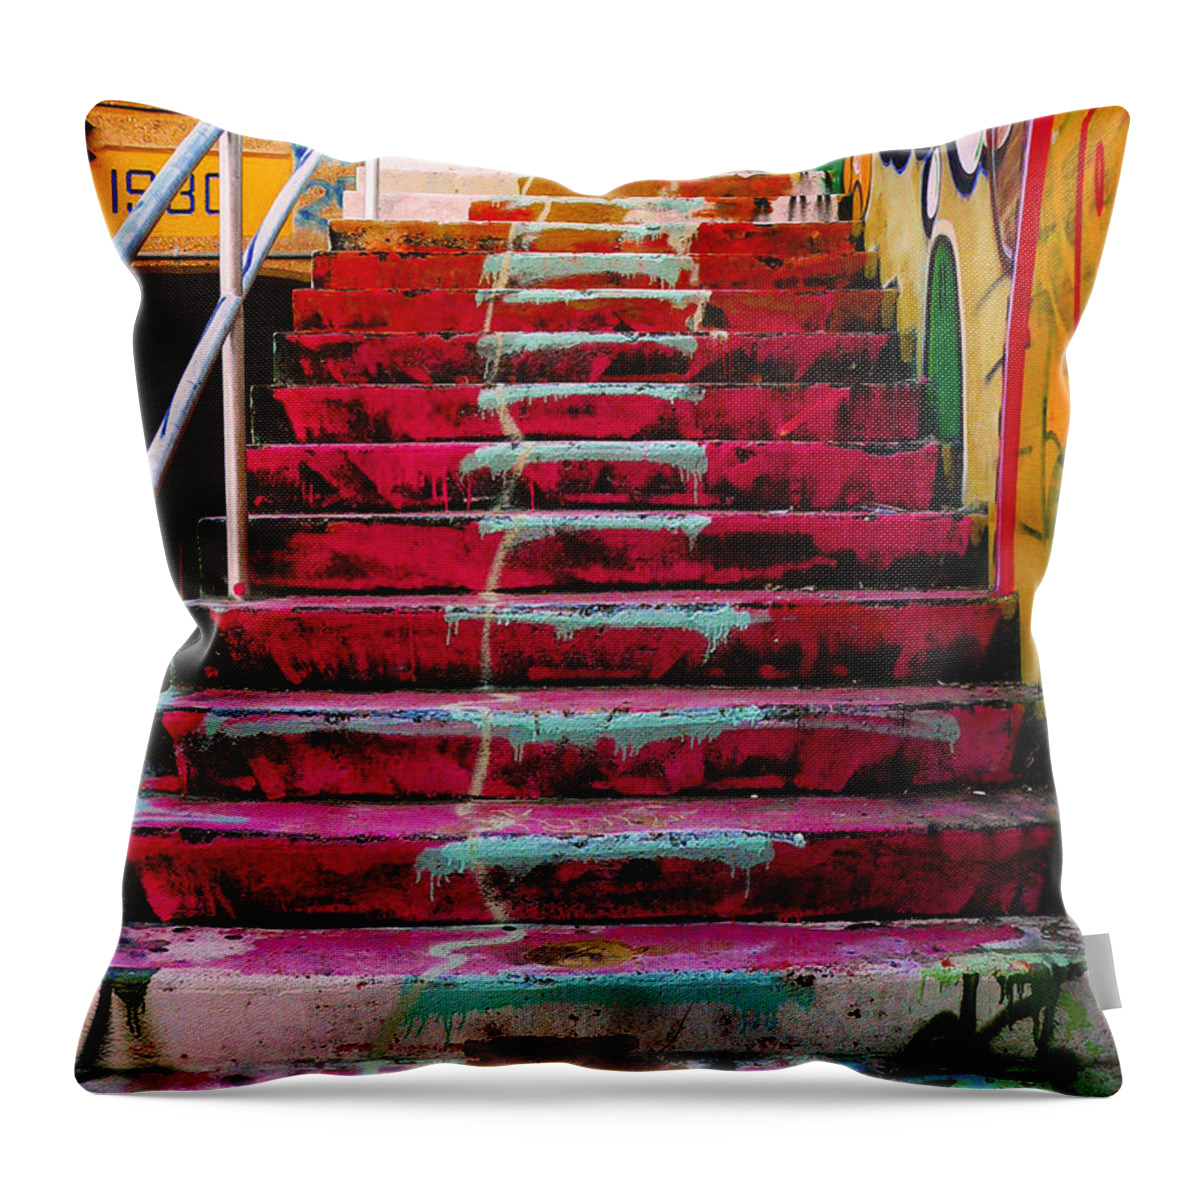 Stairs Throw Pillow featuring the photograph Stairs by Angela Wright